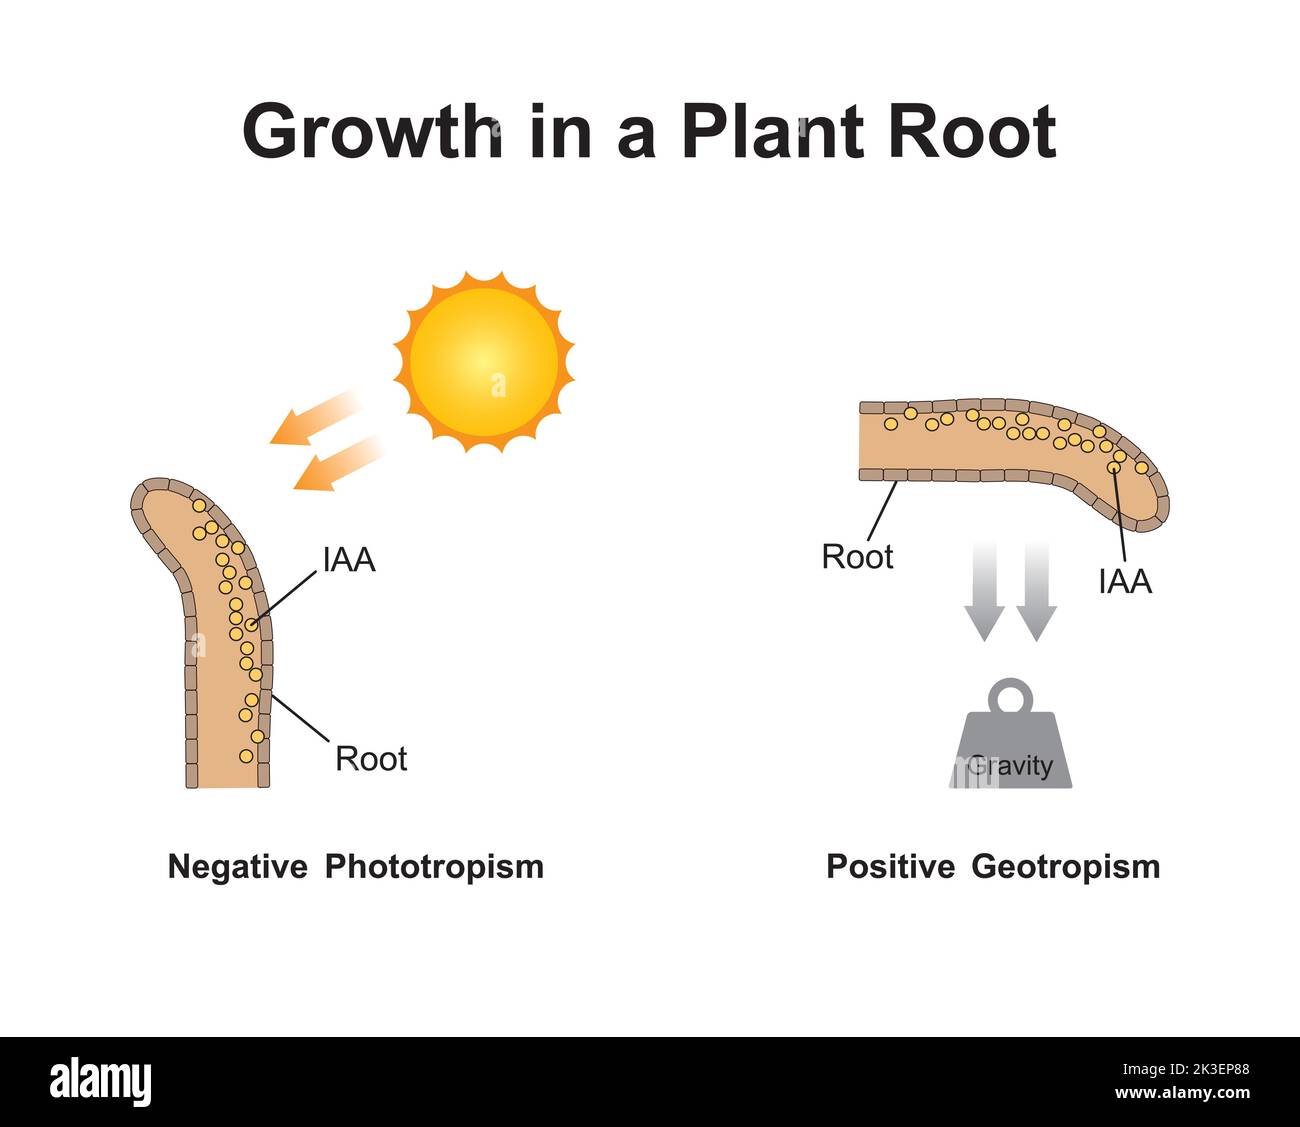 Scientific Designing of Growth in a Plant Root. Phototropism and Geotropism (Gravitropism) Effect on Plant Tissue. Colorful Symbols. Vector Illustrat Stock Vector